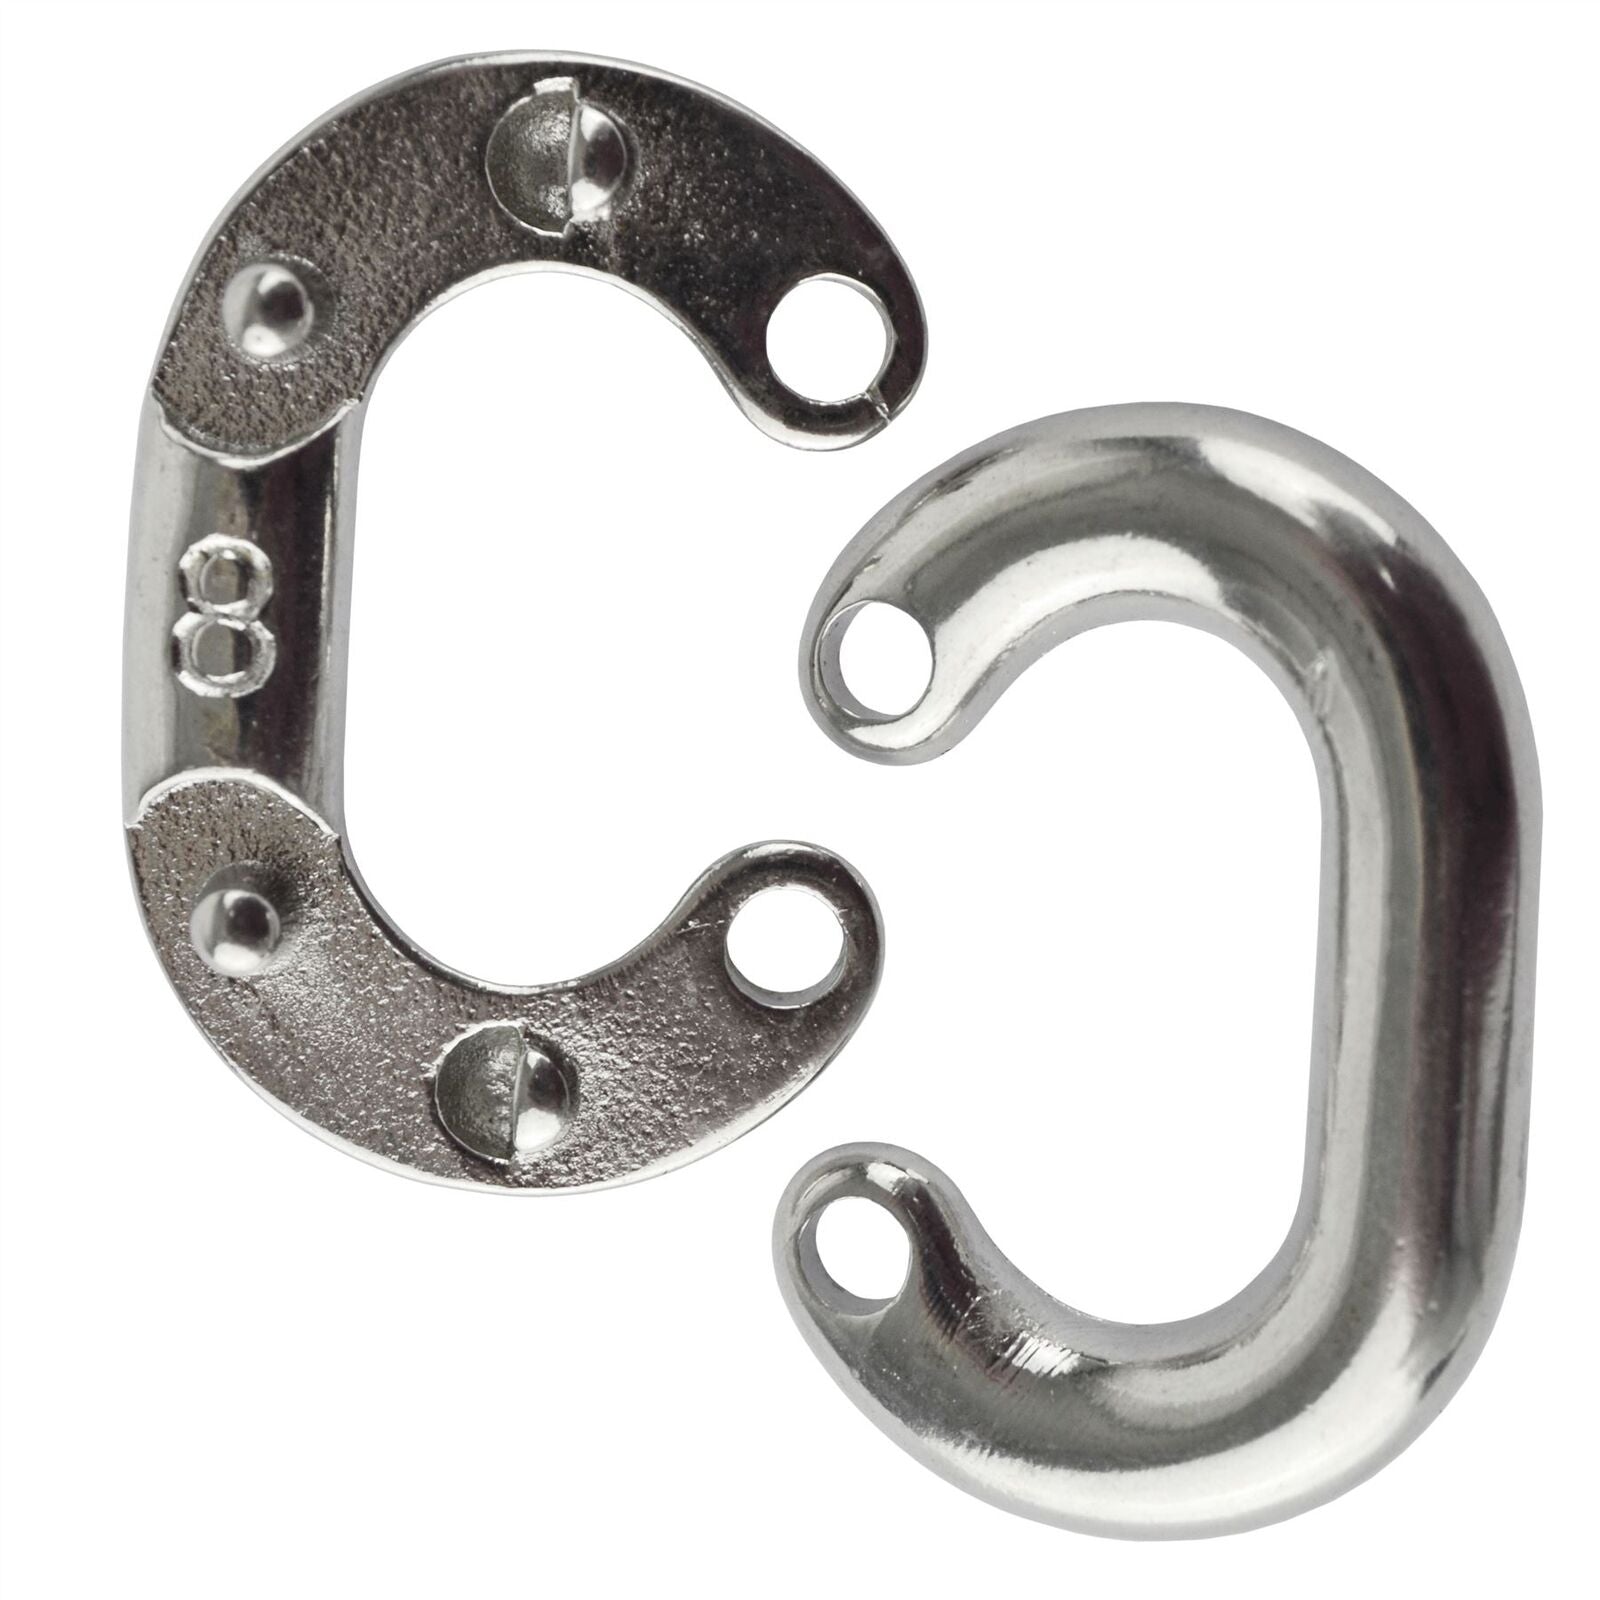 Chain Connecting Link 8Mm Marine Grade Stainless Steel Split Shackle Buckle Link